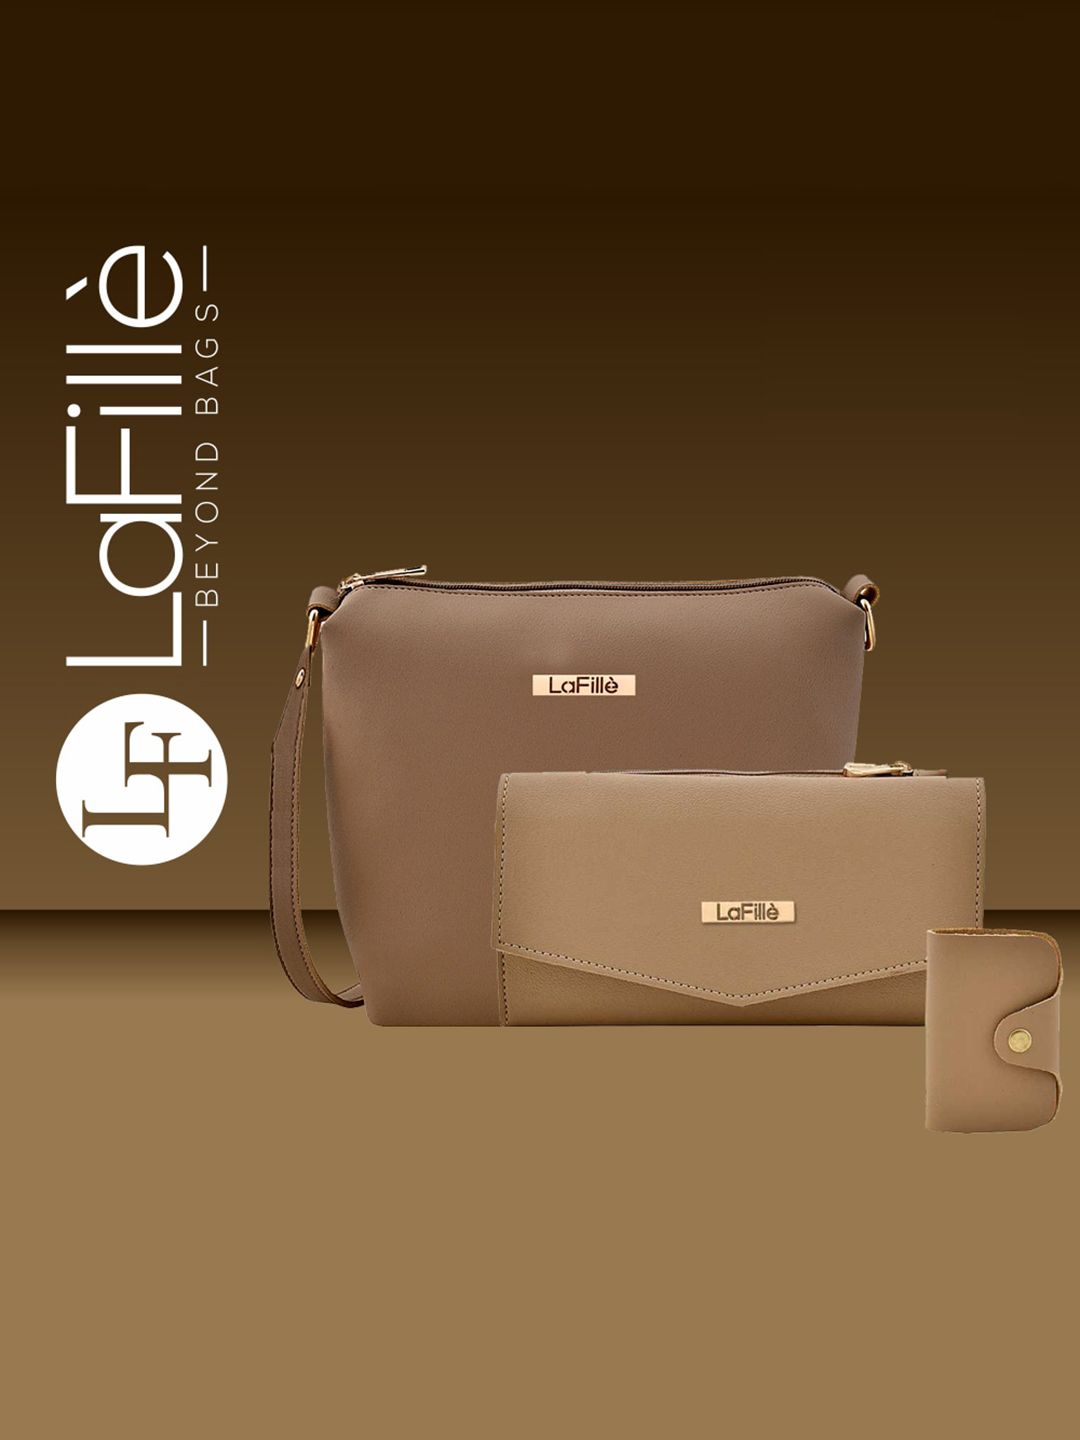 LaFille Beige PU Structured Sling Bag with Wallet Price in India